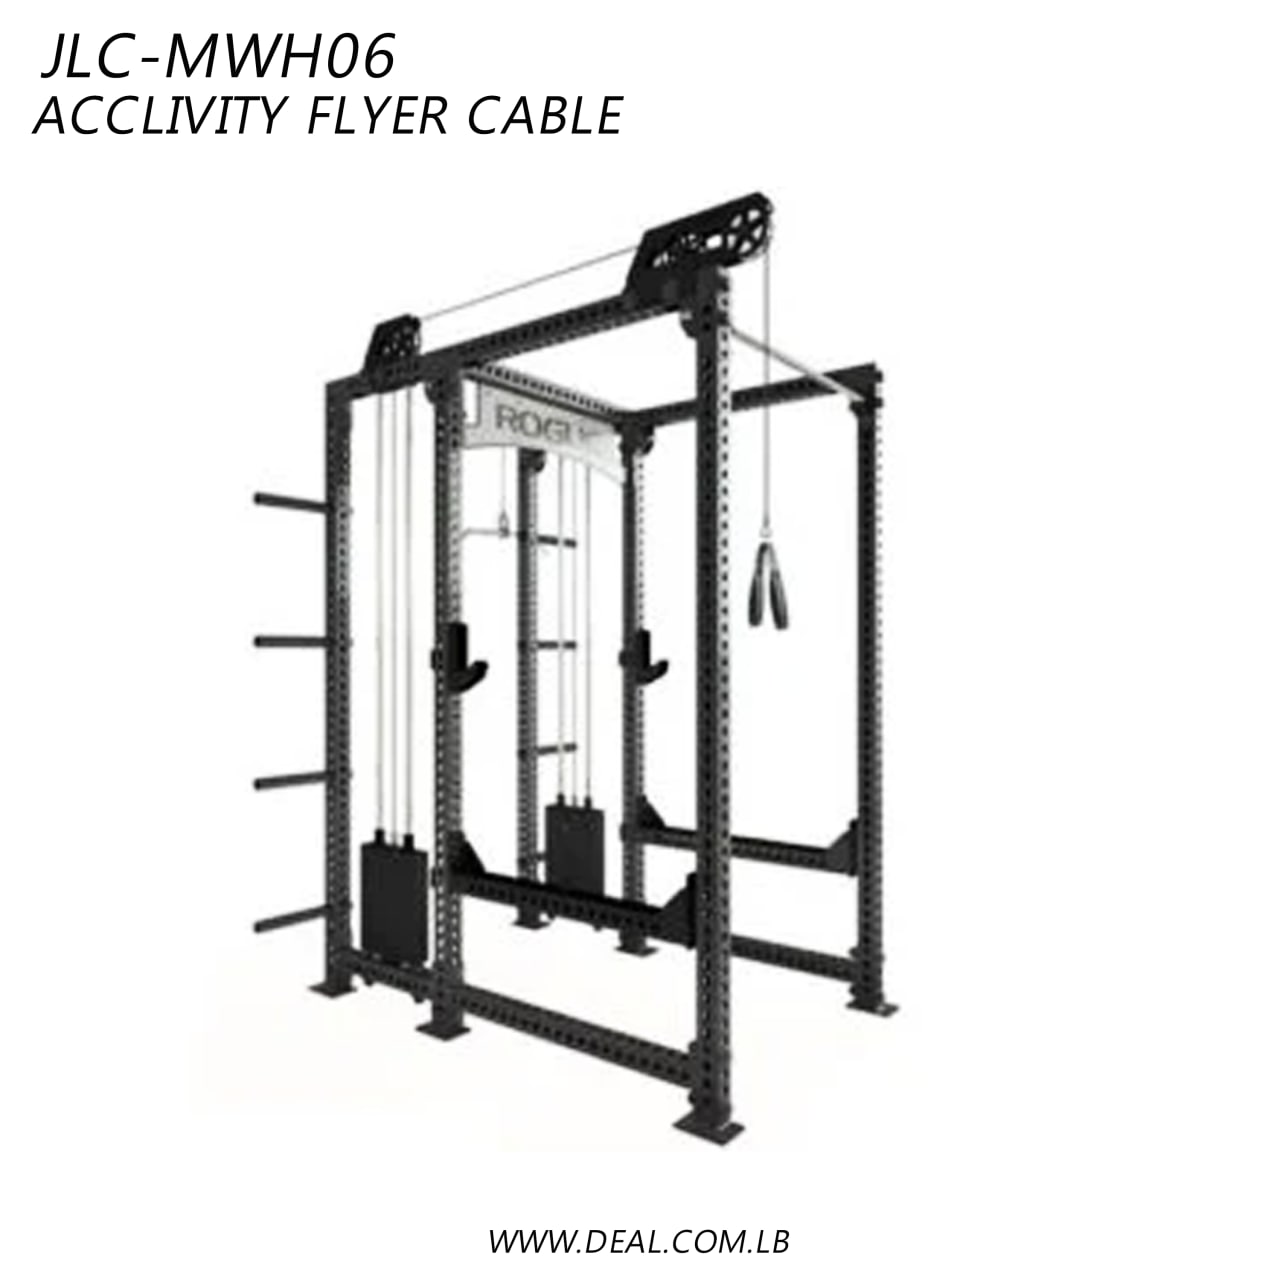 JLC-MWH06 | Acclivity Flyer Cable